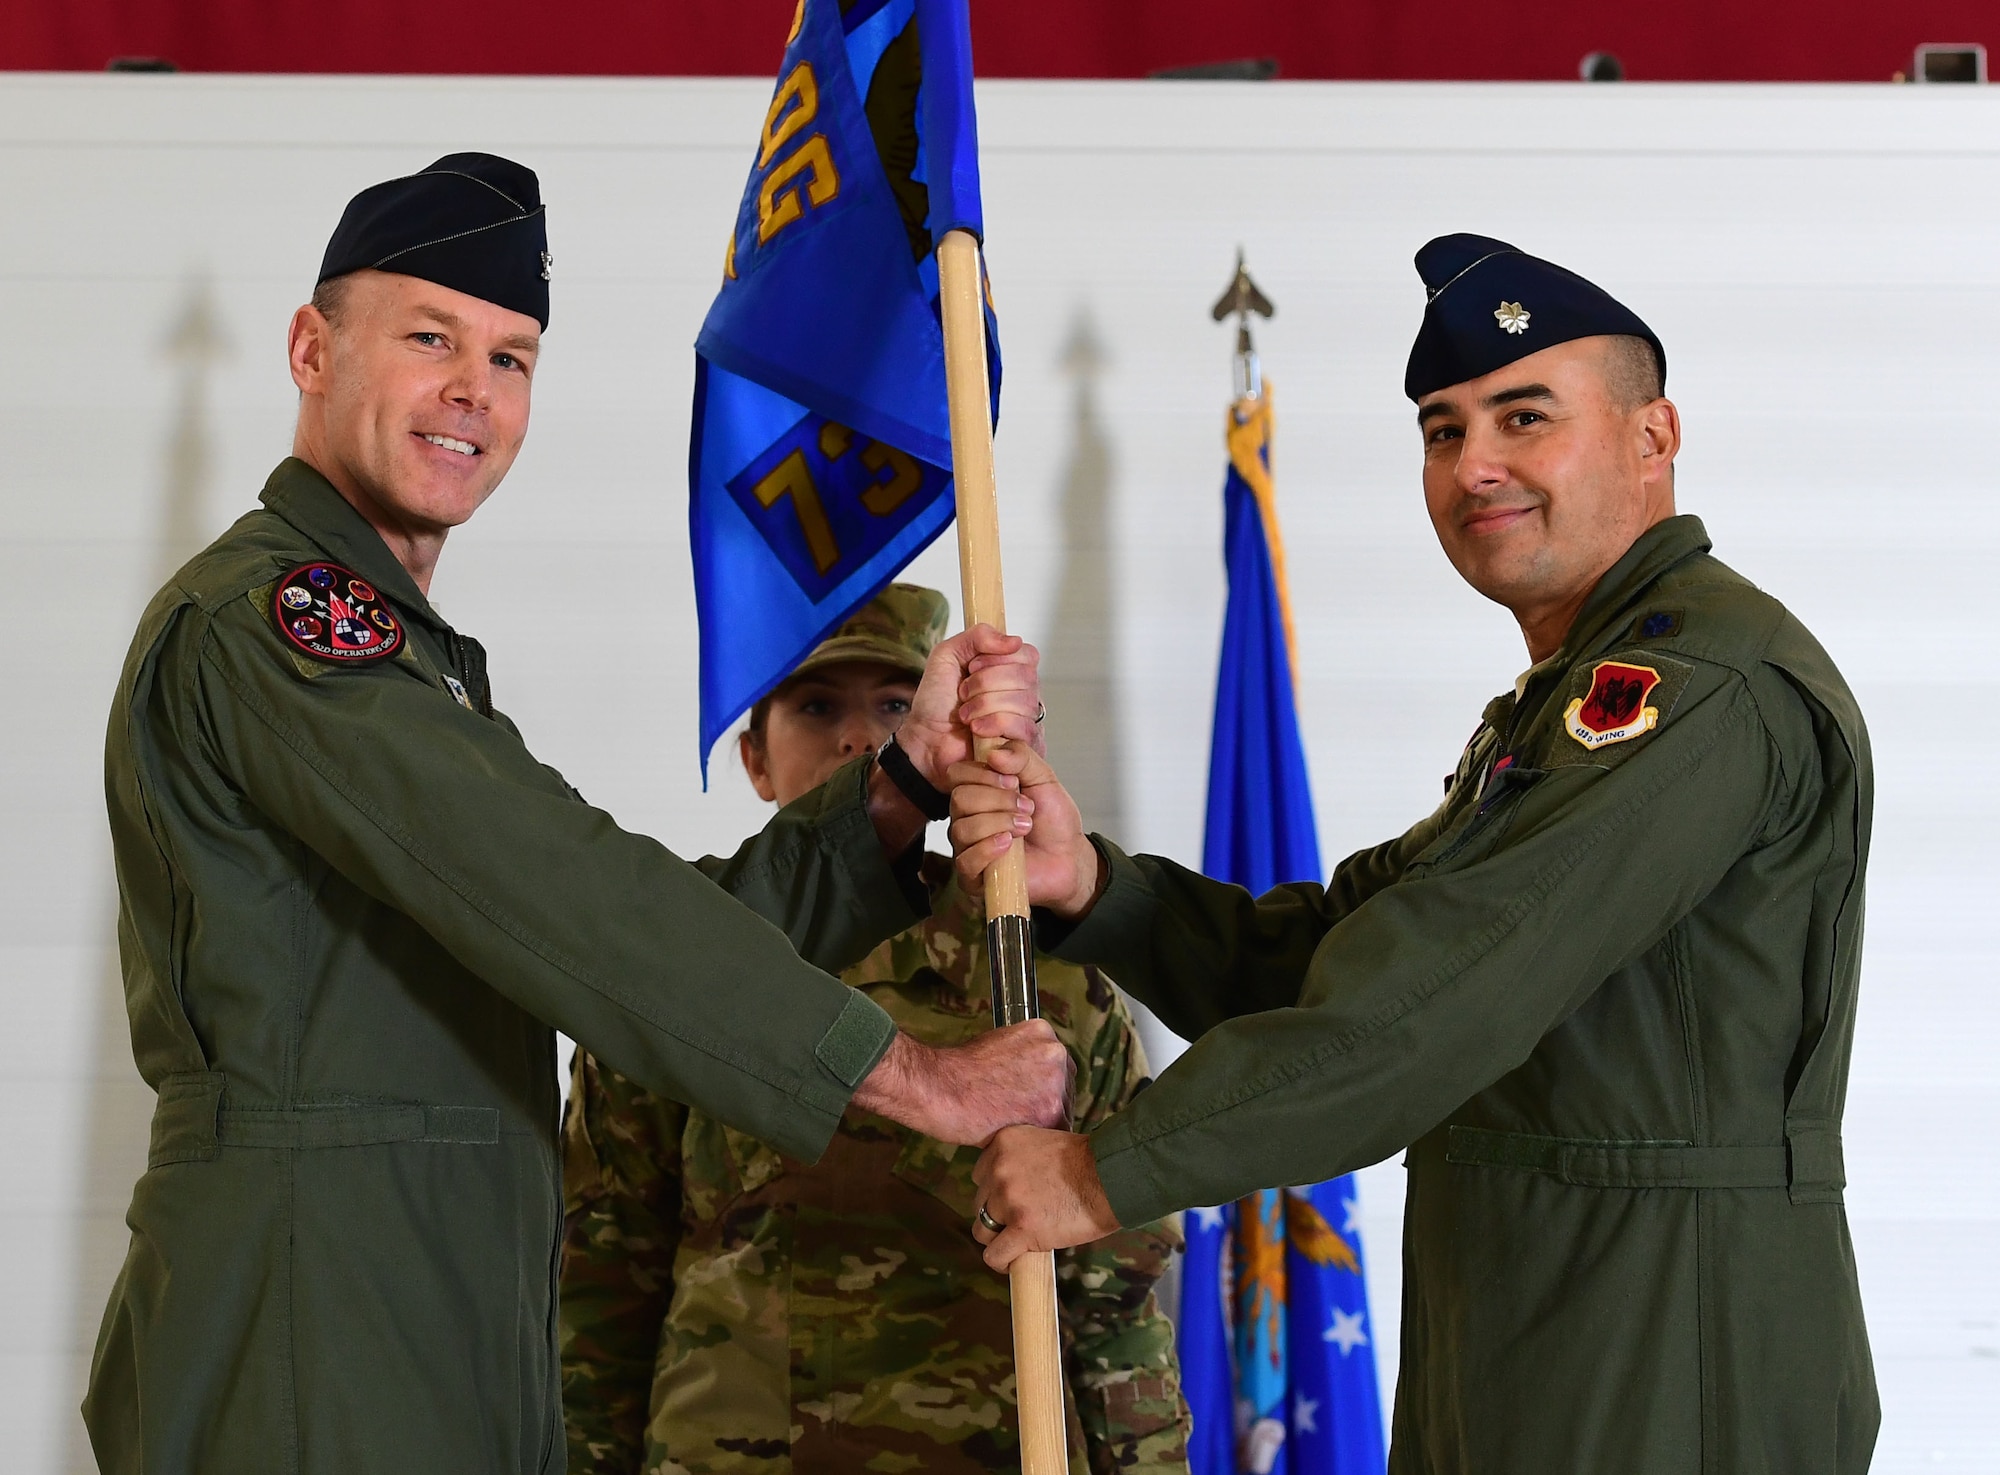 Lt. Col. Hector, 732nd Operations Support Squadron commander, assumes command of the 732nd OSS from Col. Christopher, 732nd Operations Group commander at Creech Air Force Base, Nevada, Jan. 23, 2019. The new unit, dubbed the “Archers,” will provide the support required for the MQ-9 Reaper attack squadrons within the 732nd OG to seamlessly execute their persistent attack and reconnaissance missions. (U.S. Air Force photo by Senior Airman Christian Clausen)